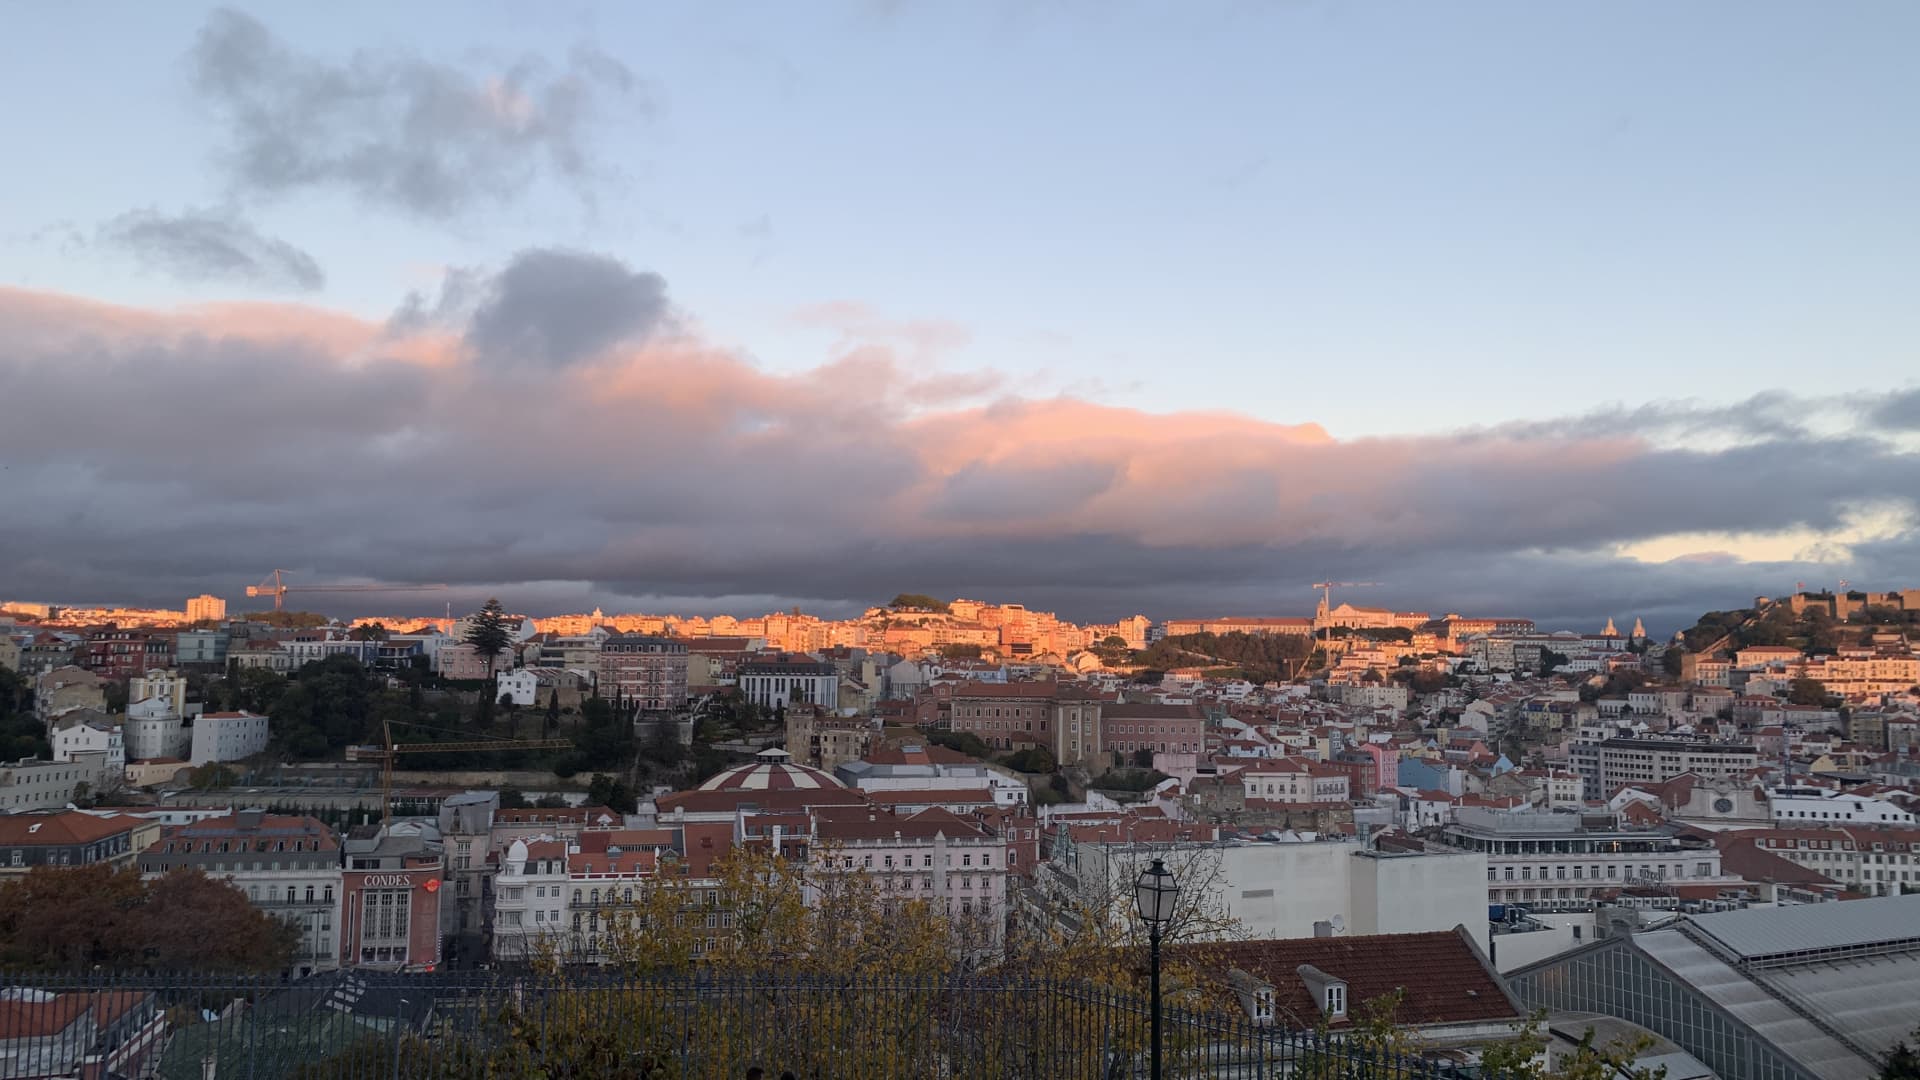 The Miradouro de São Pedro de Alcântara is a perfect spot to admire Lisbon at dusk. Alex Trias and his family bought an apartment in the city for a little over €500,000 in 2015.